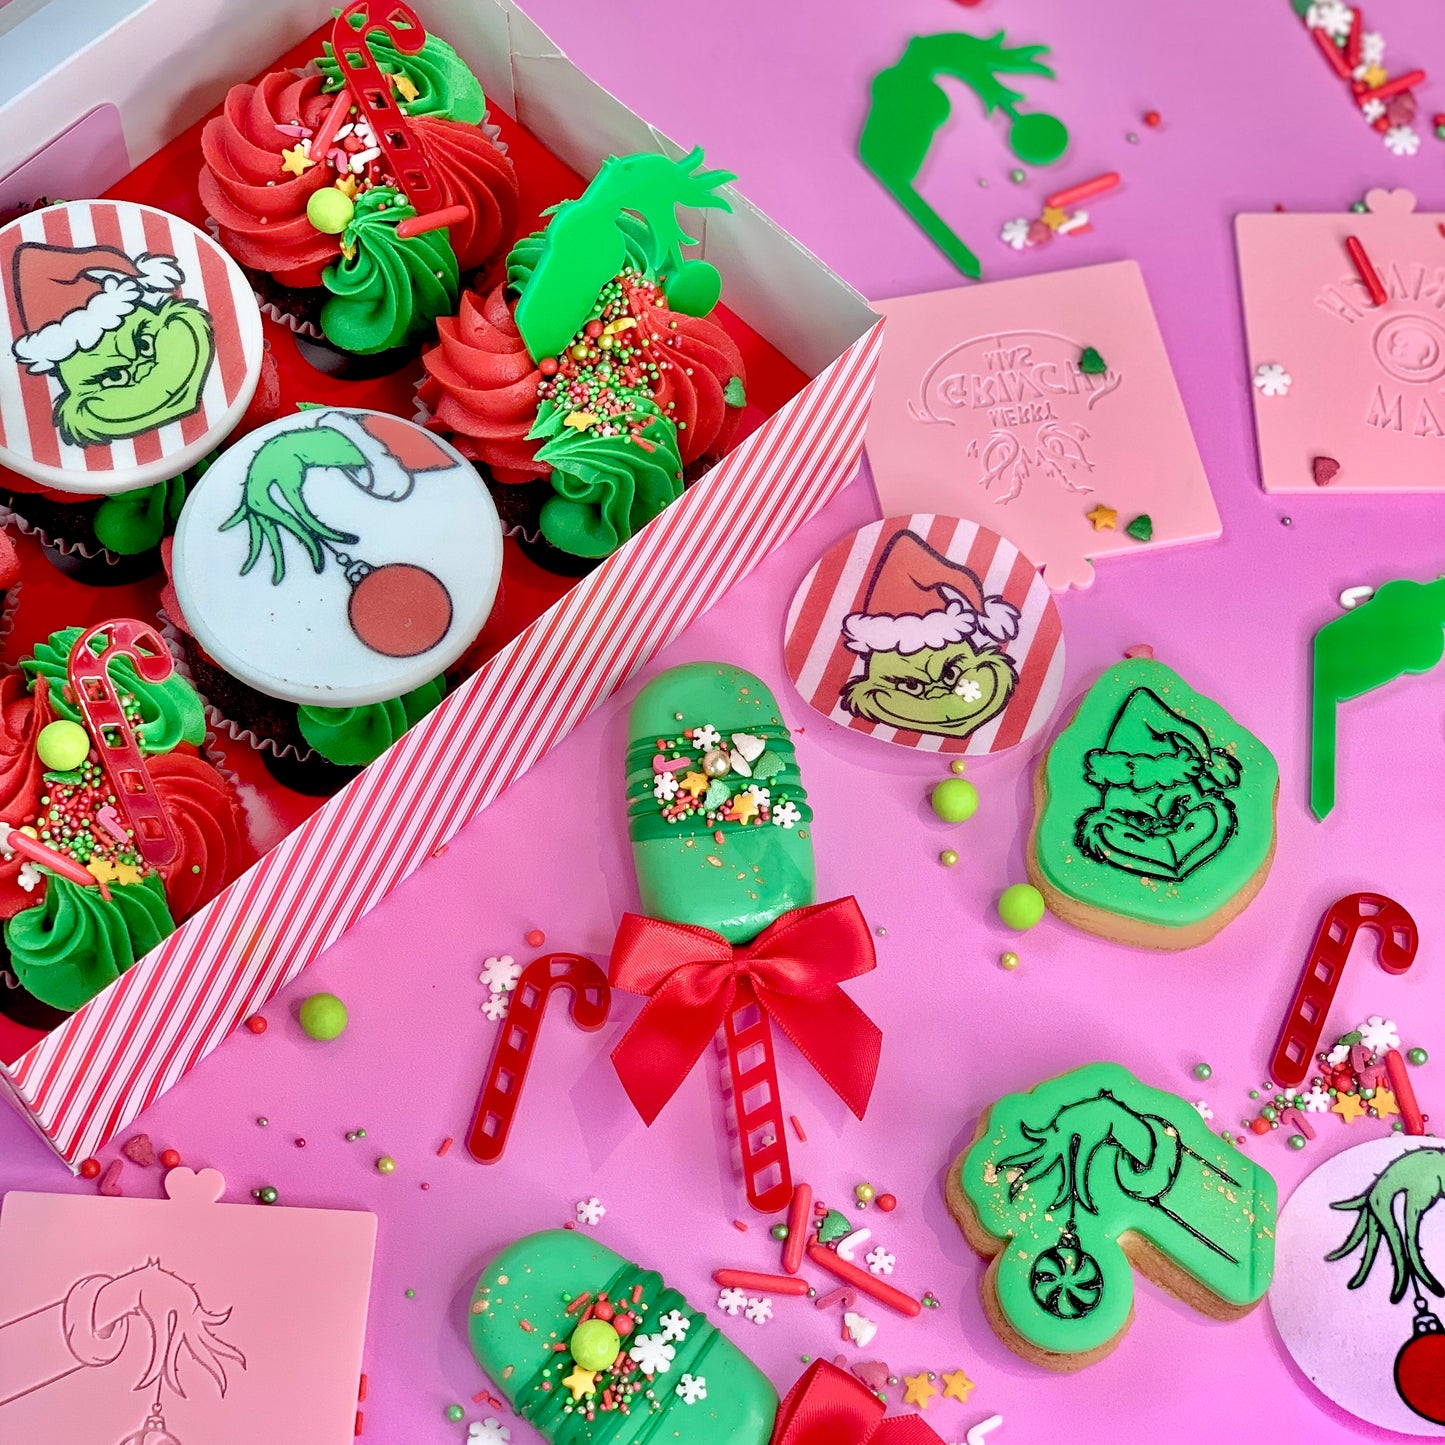 EDIBLE TOPPERS - THE GRINCH